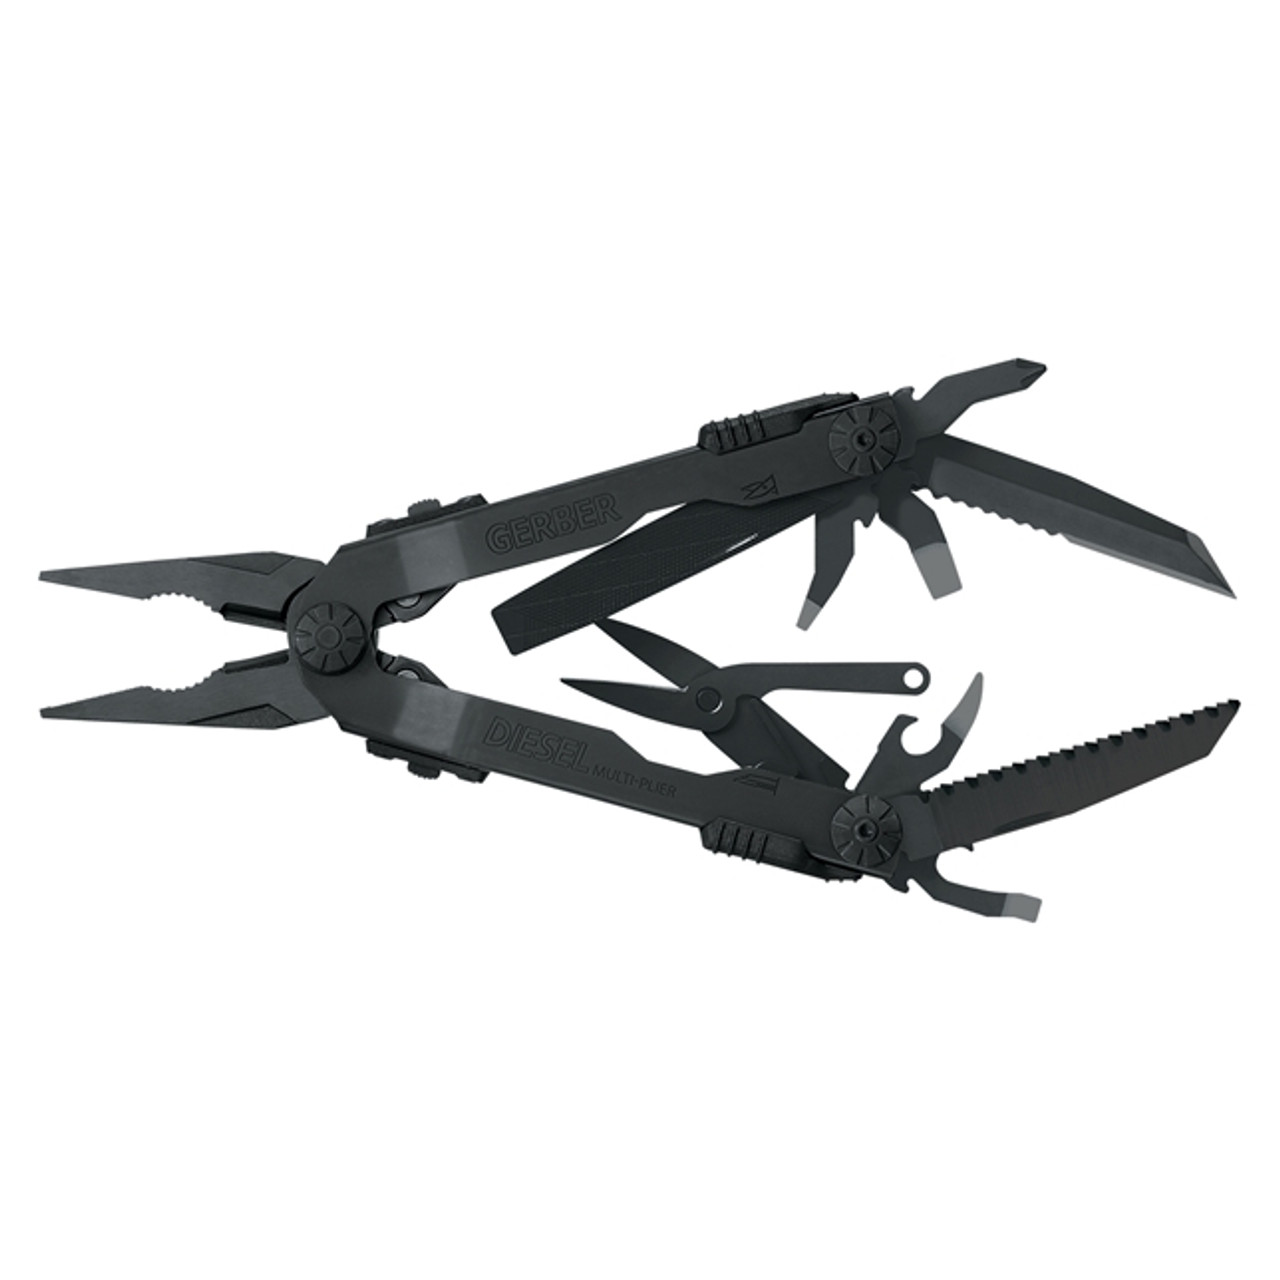 Purchase the Gerber Multitool Center Drive gray/black by ASMC